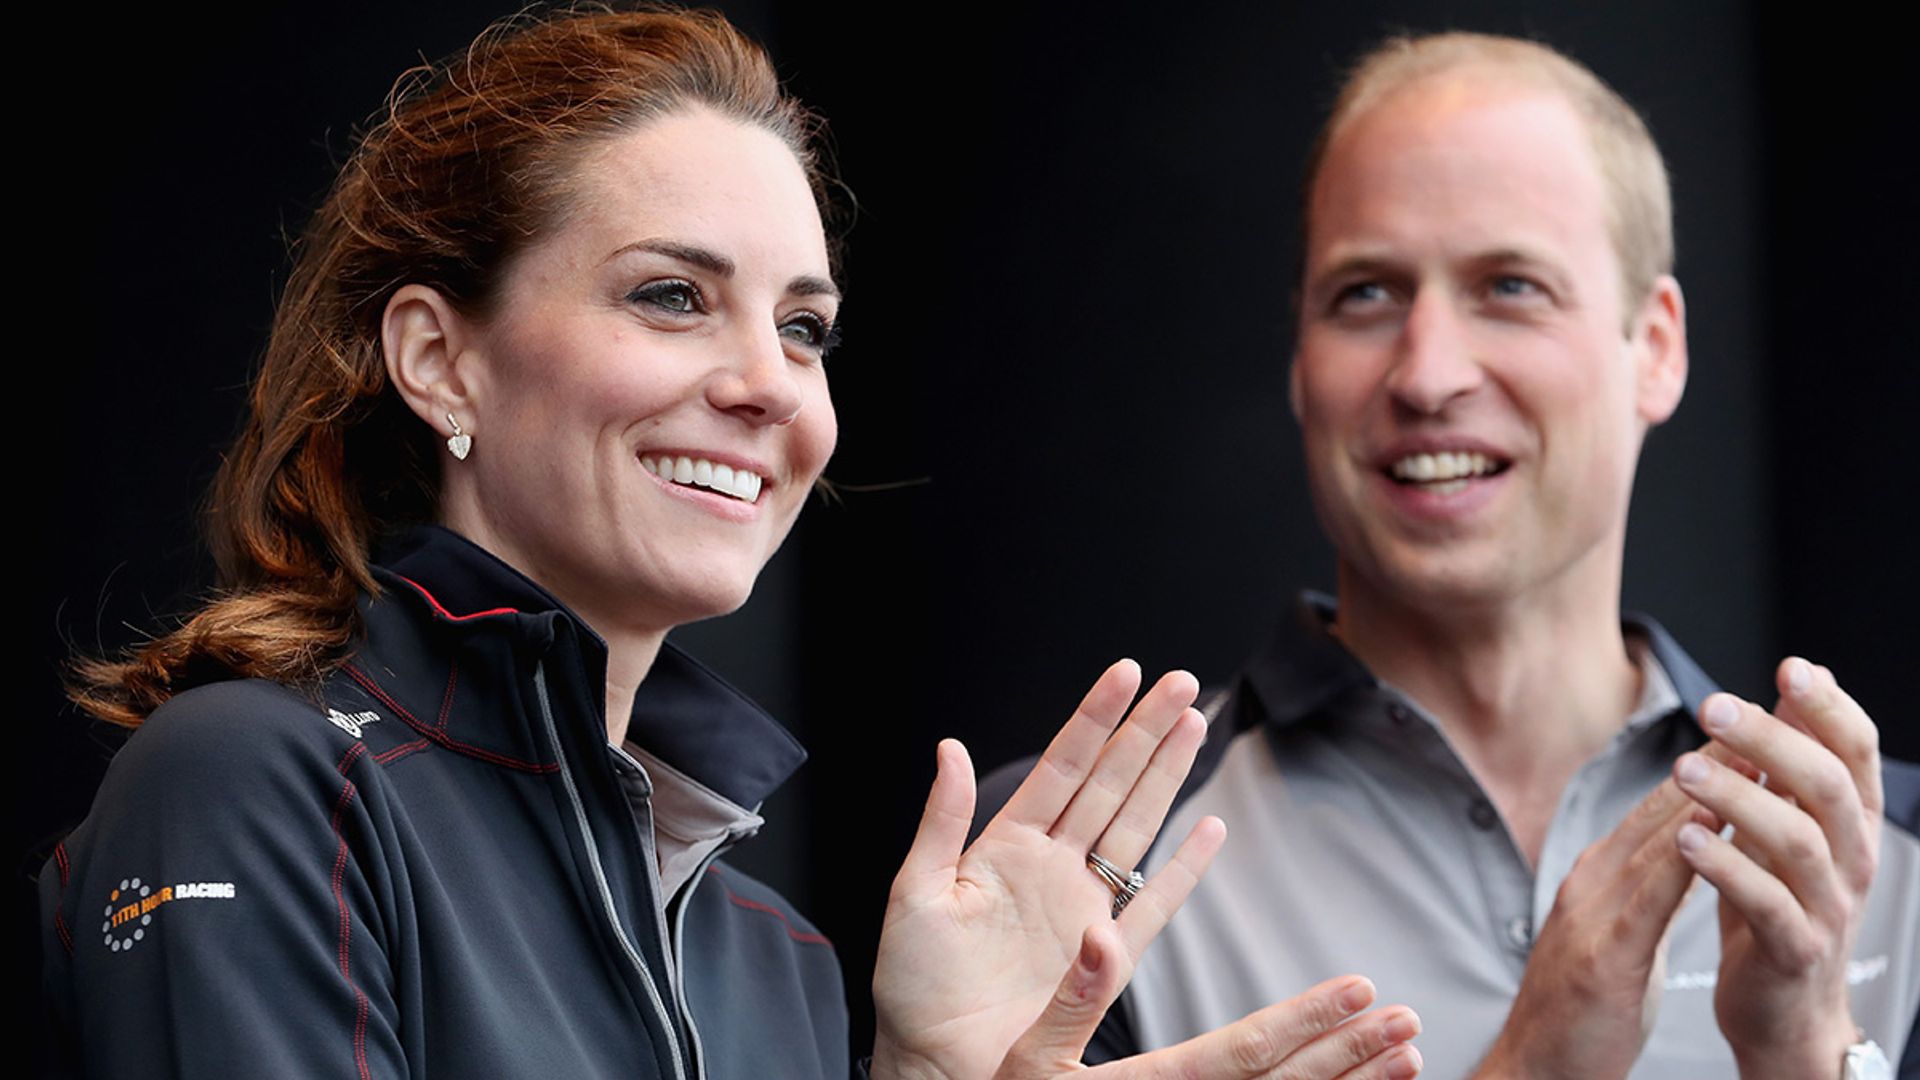 prince william and kate middleton in casualwear